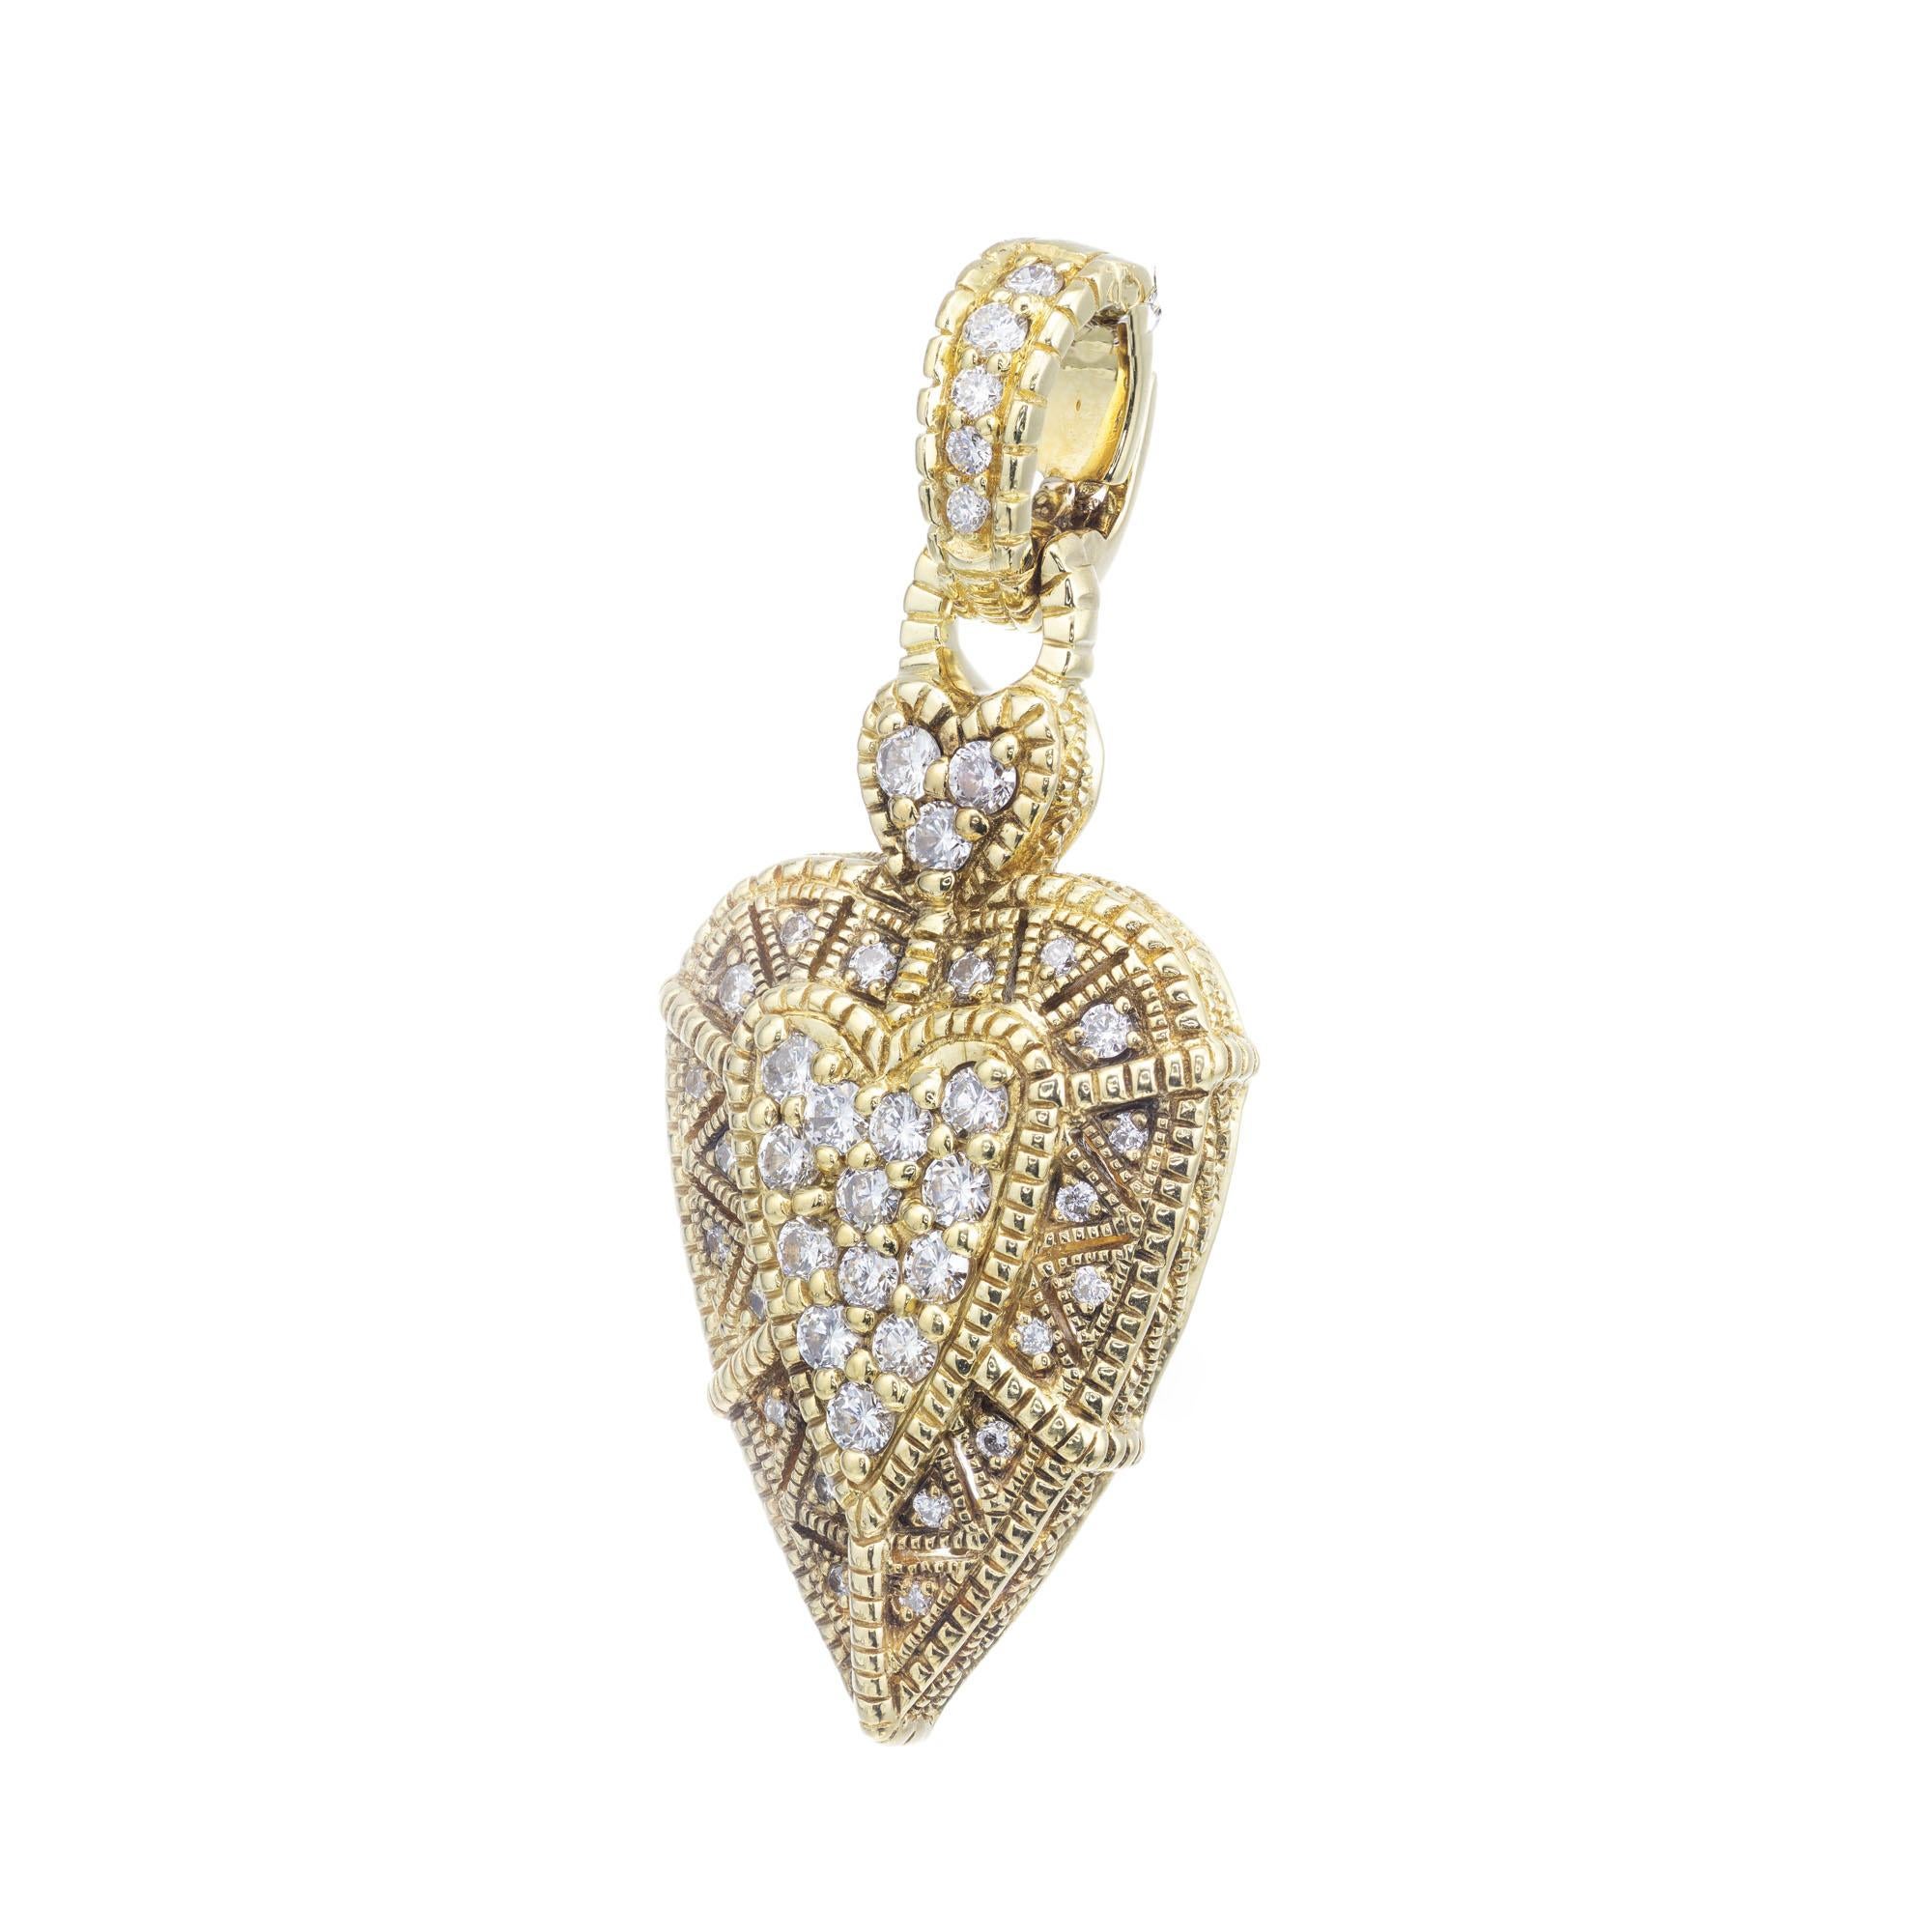 Judith Ripka heart shaped pendant enhancer set with 42 bright full cut Diamonds in 18k yellow gold. Bail opens to go over a chain or pearls. chain not included. 

42 round full cut Diamonds, approx. total weight .50cts, H, VS – SI 
18k yellow